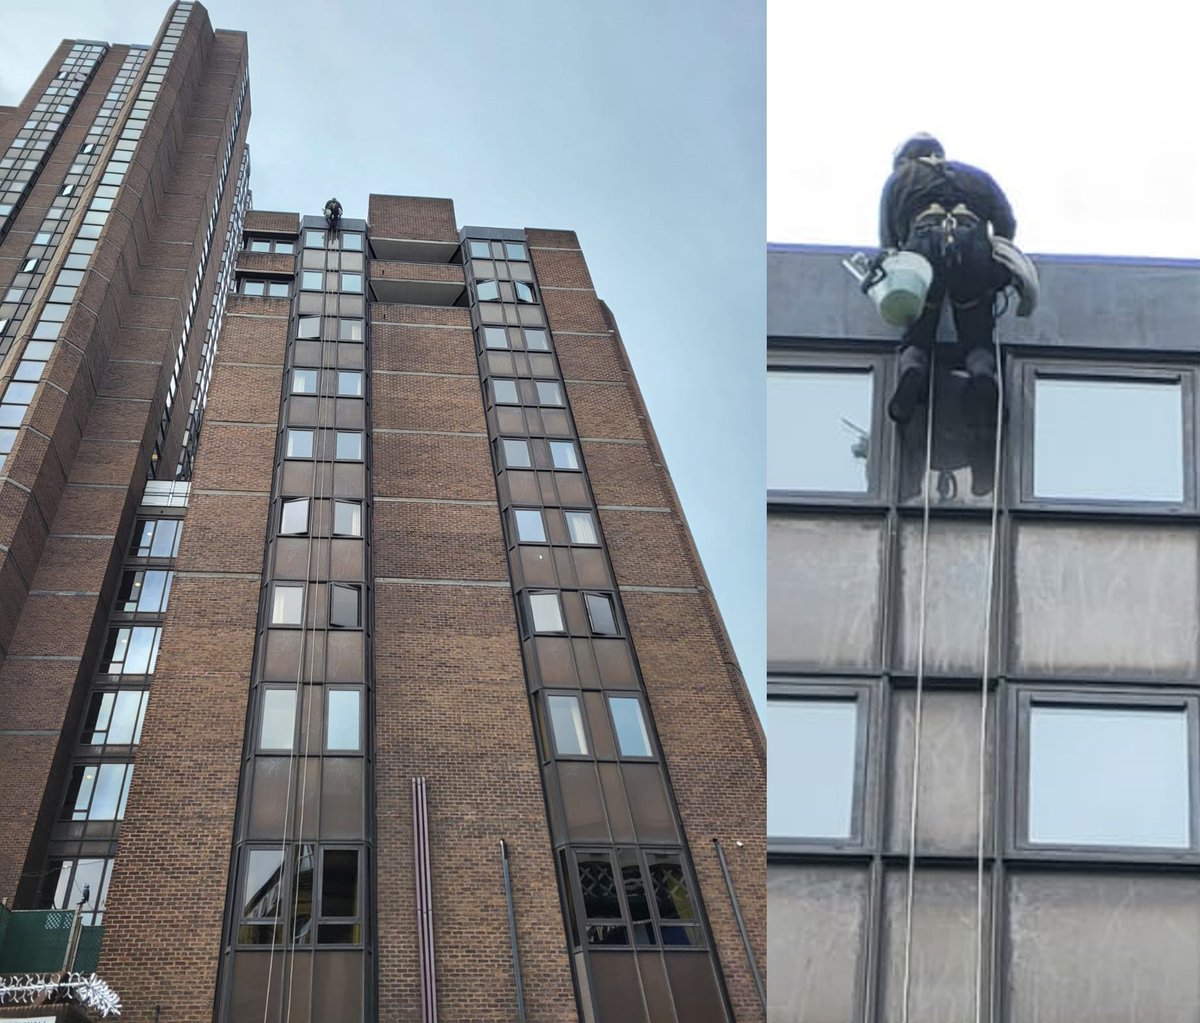 An advantage of providing superb central London Club accommodation for Members (260 rooms, 24 floors), is that many views are amazing and we get abseiling window cleaners; hang out here if you can! #RoyalNavy #BritishArmy #RAF #Veterans